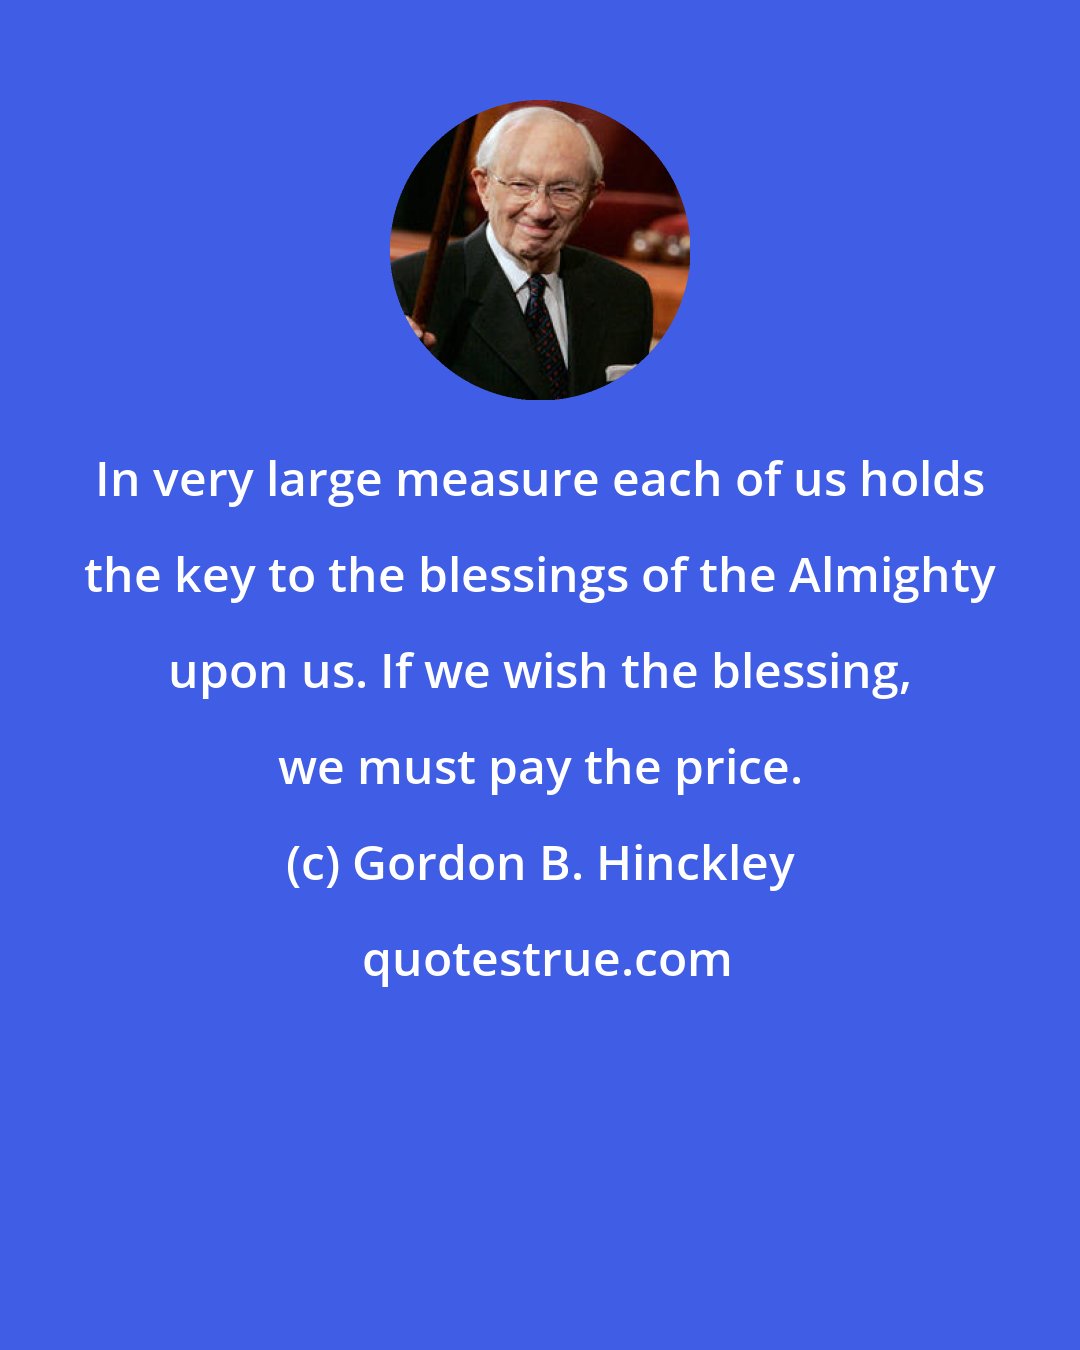 Gordon B. Hinckley: In very large measure each of us holds the key to the blessings of the Almighty upon us. If we wish the blessing, we must pay the price.